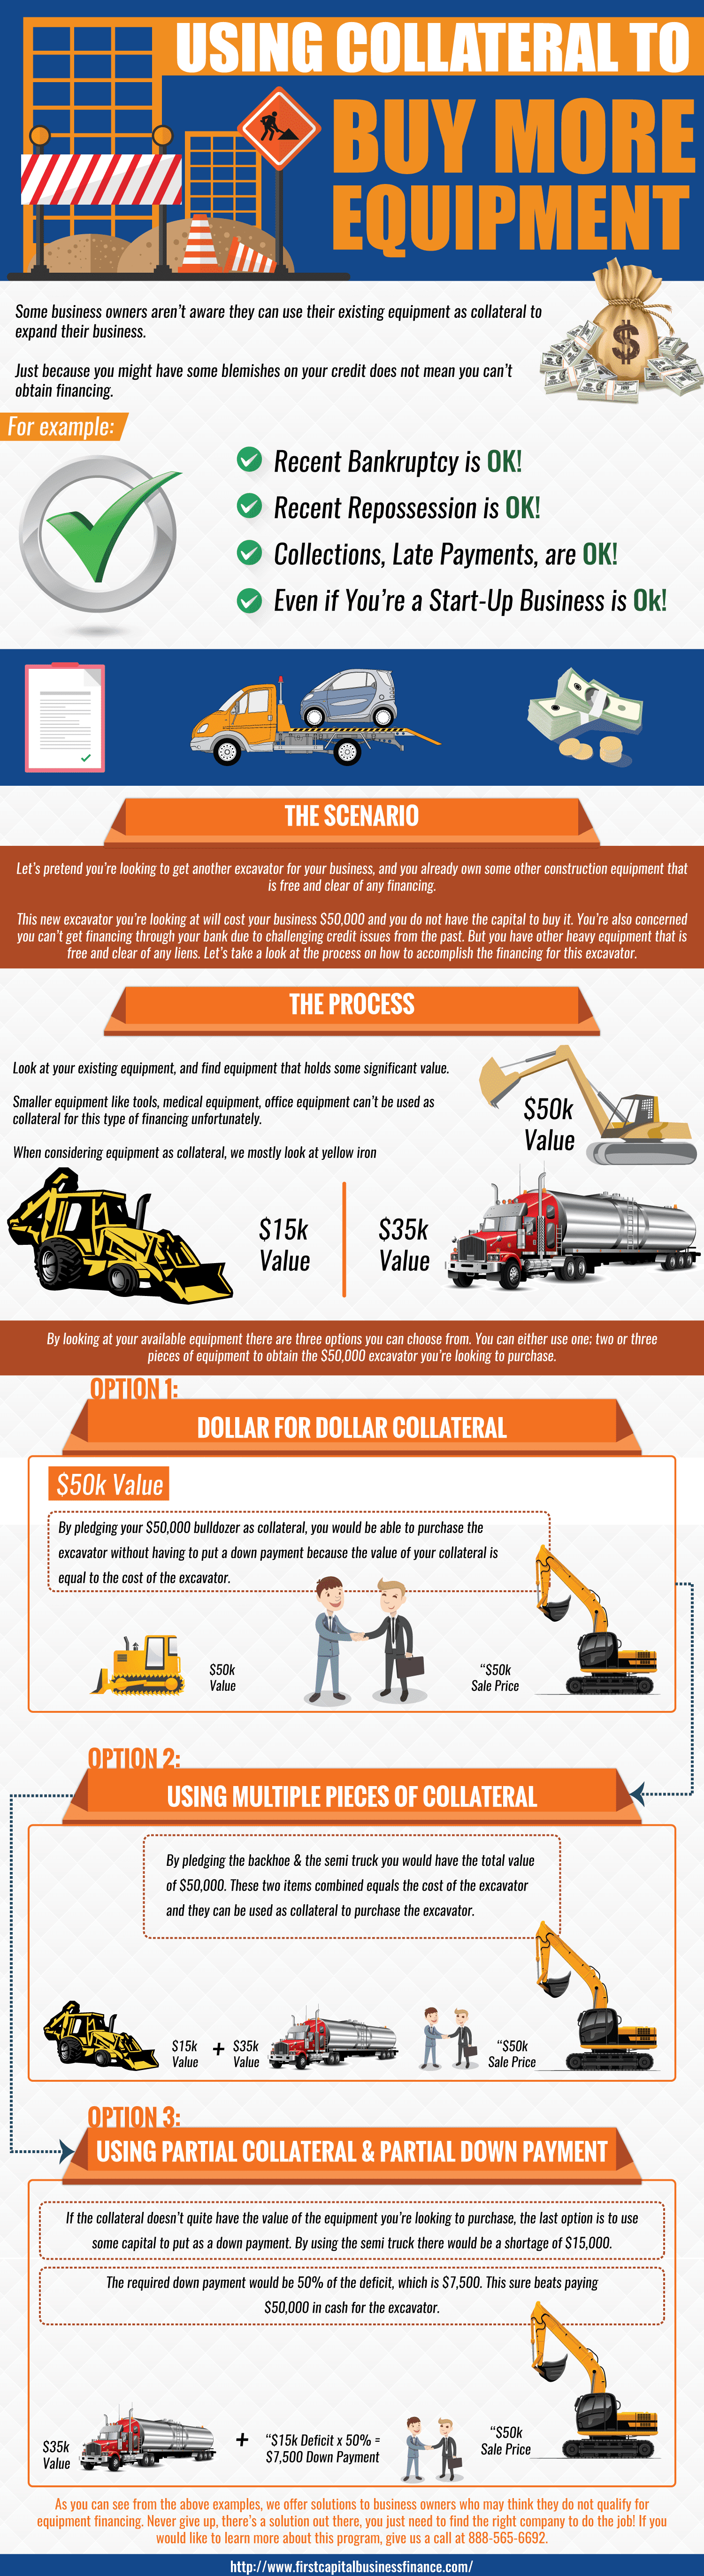 Using Collateral to Buy More Equipment Infographic